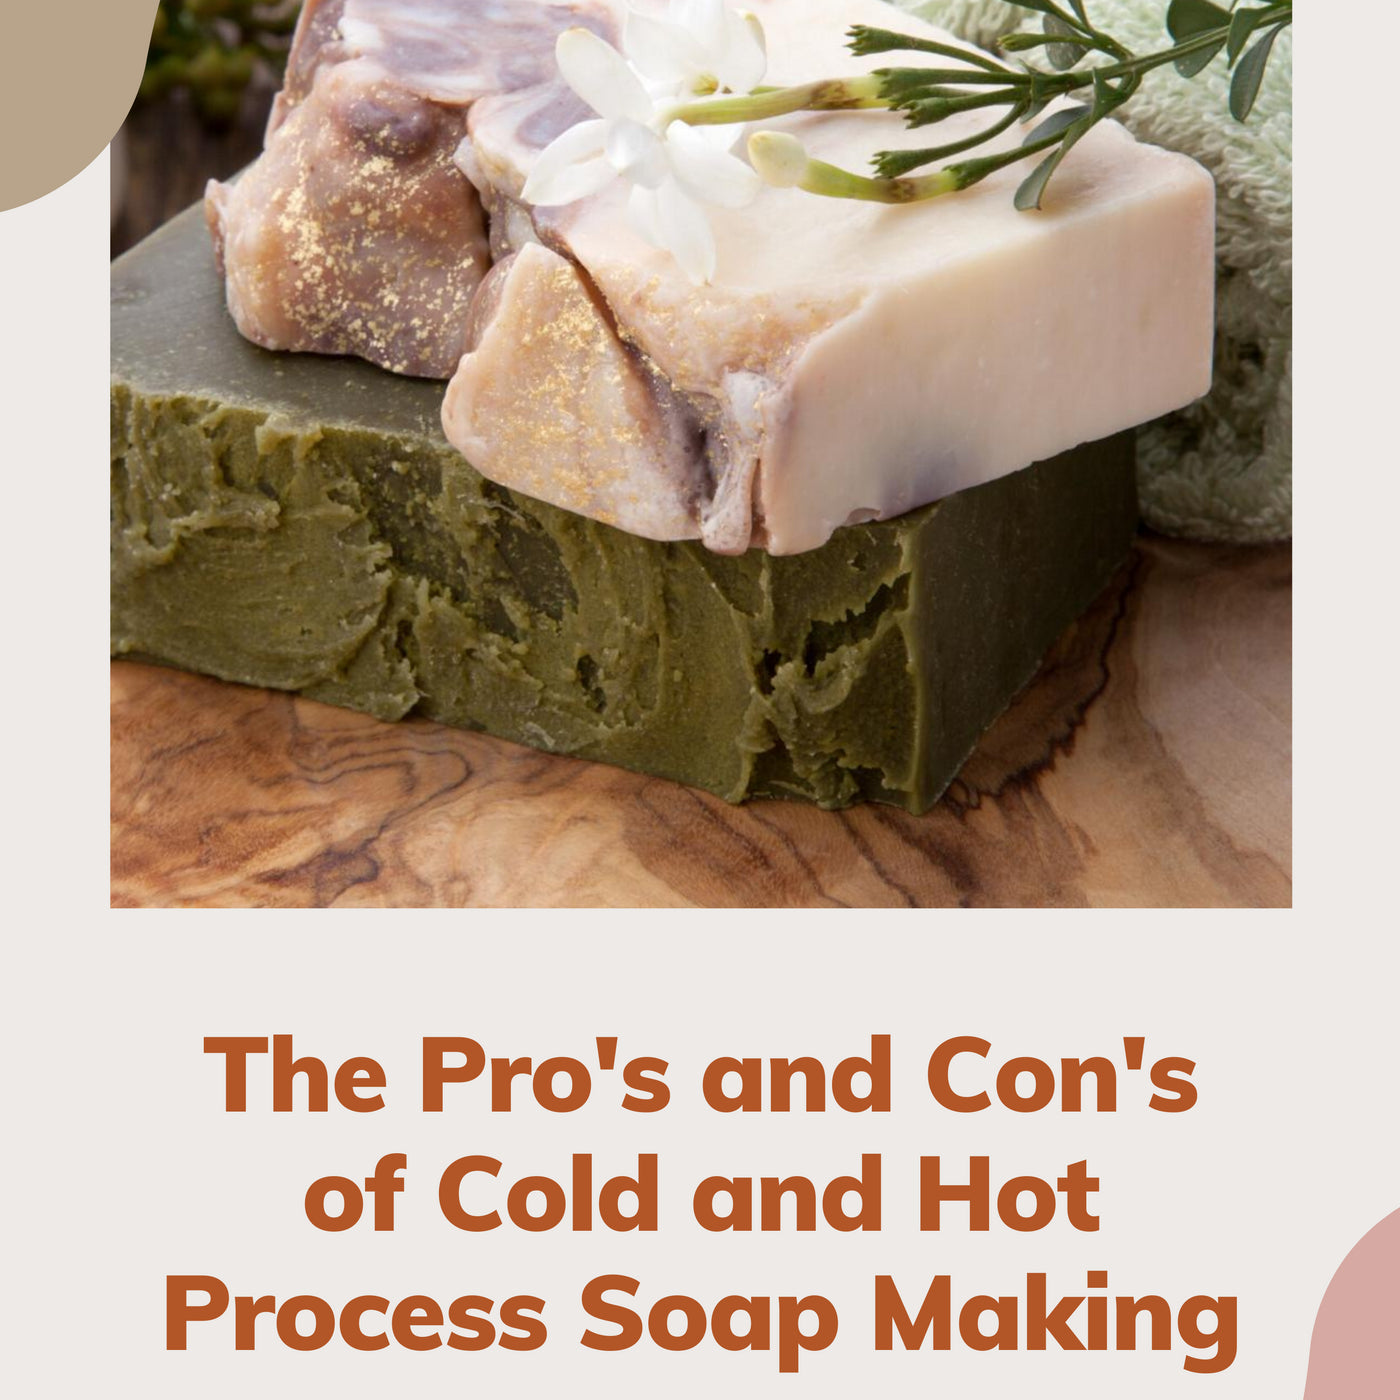 The Pro's and Con's of Cold and Hot Process Soap Making - The Soap Coach